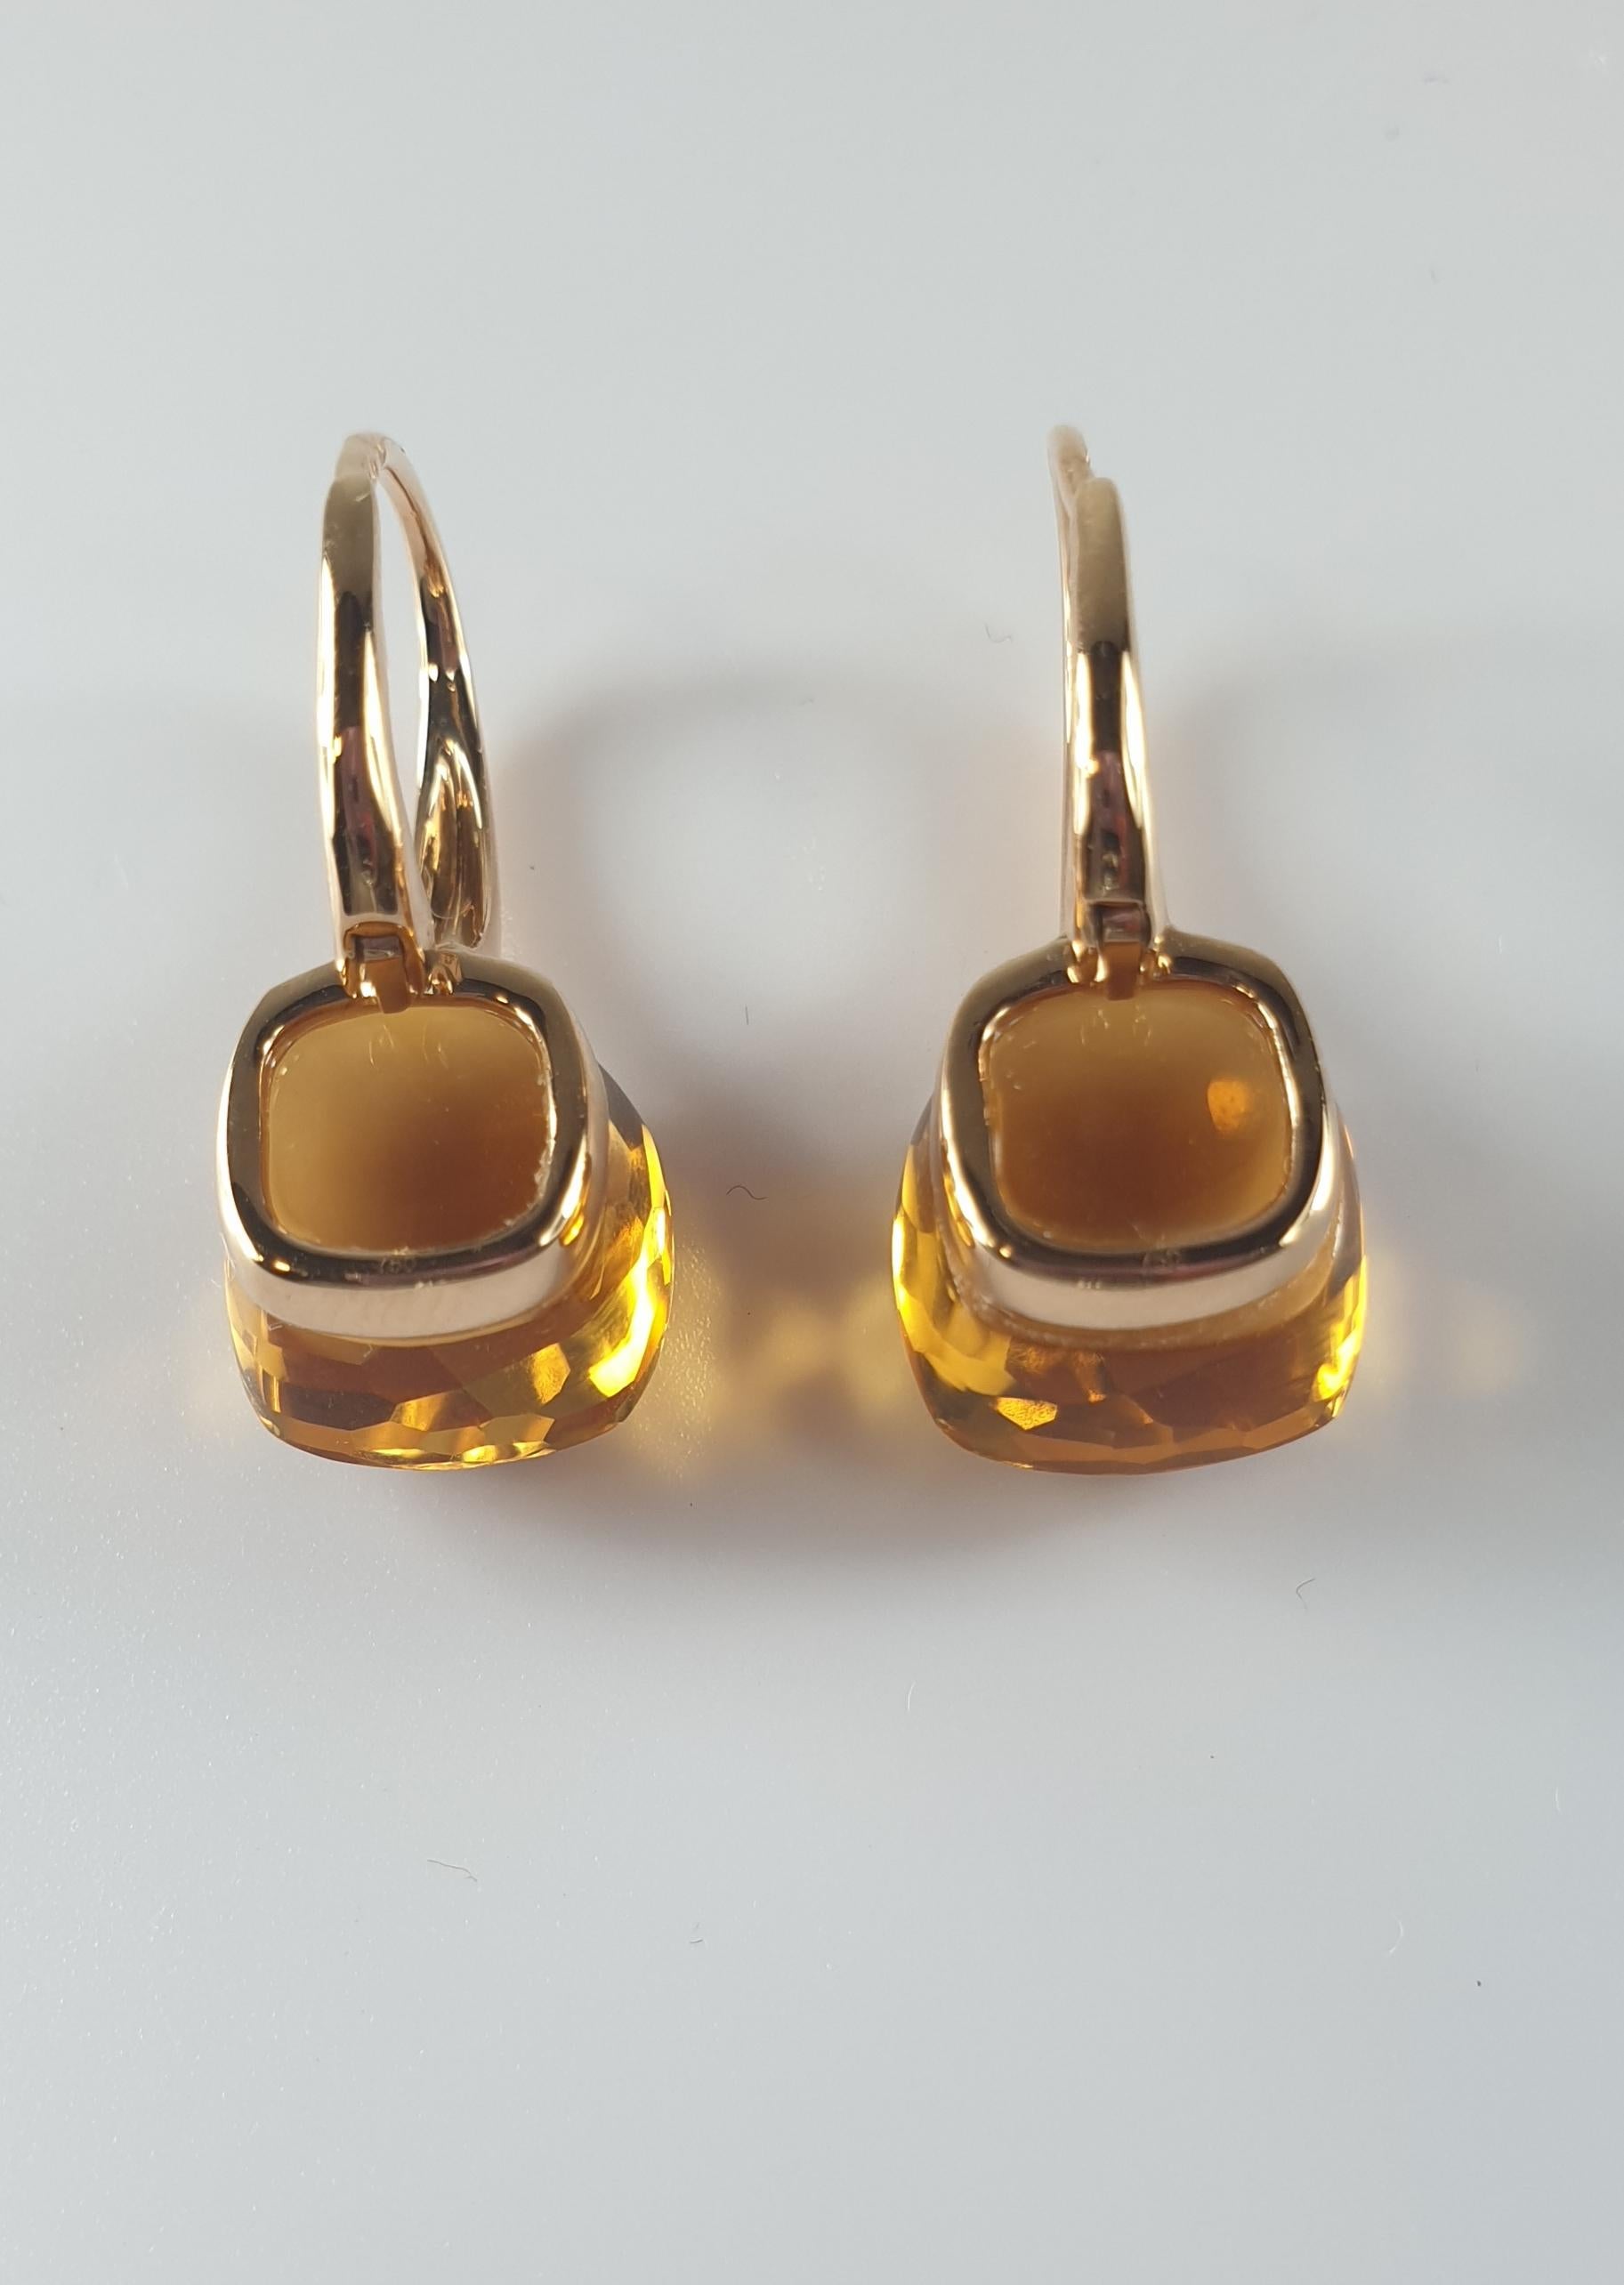 This pair of earrings weight total 5.9gr and measure 22mm or 0.75 inches
Citrine are 4,00ct each 
Also available in  amethyst, rose quartz, pink quartz, green quartz, lemon quartz, milky quartz  topaze
Please note that carat weights may slightly